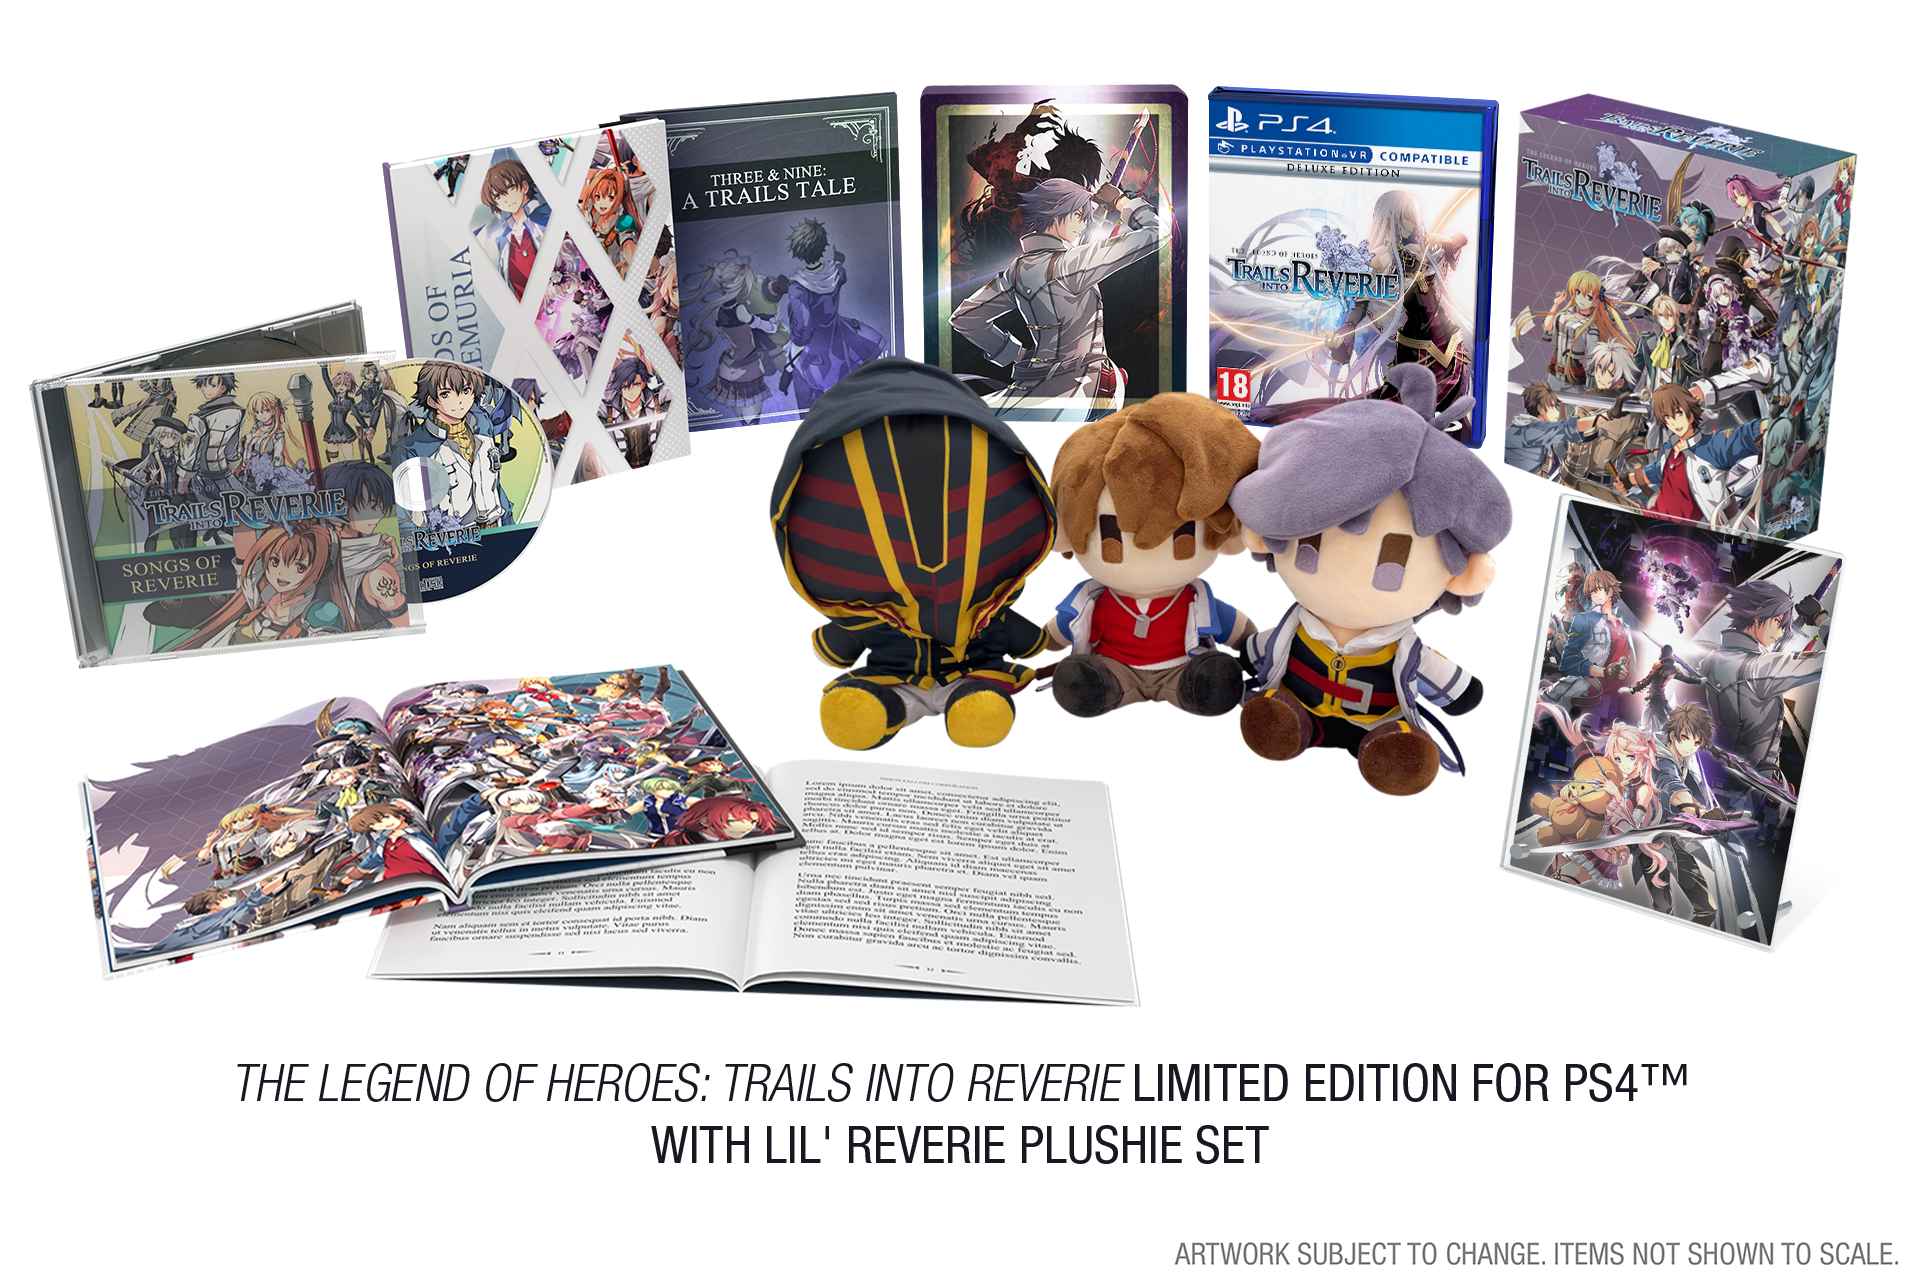 The Legend of Heroes: Trails into Reverie Limited Edition with Lil' Reverie Plushie Set - PS4®